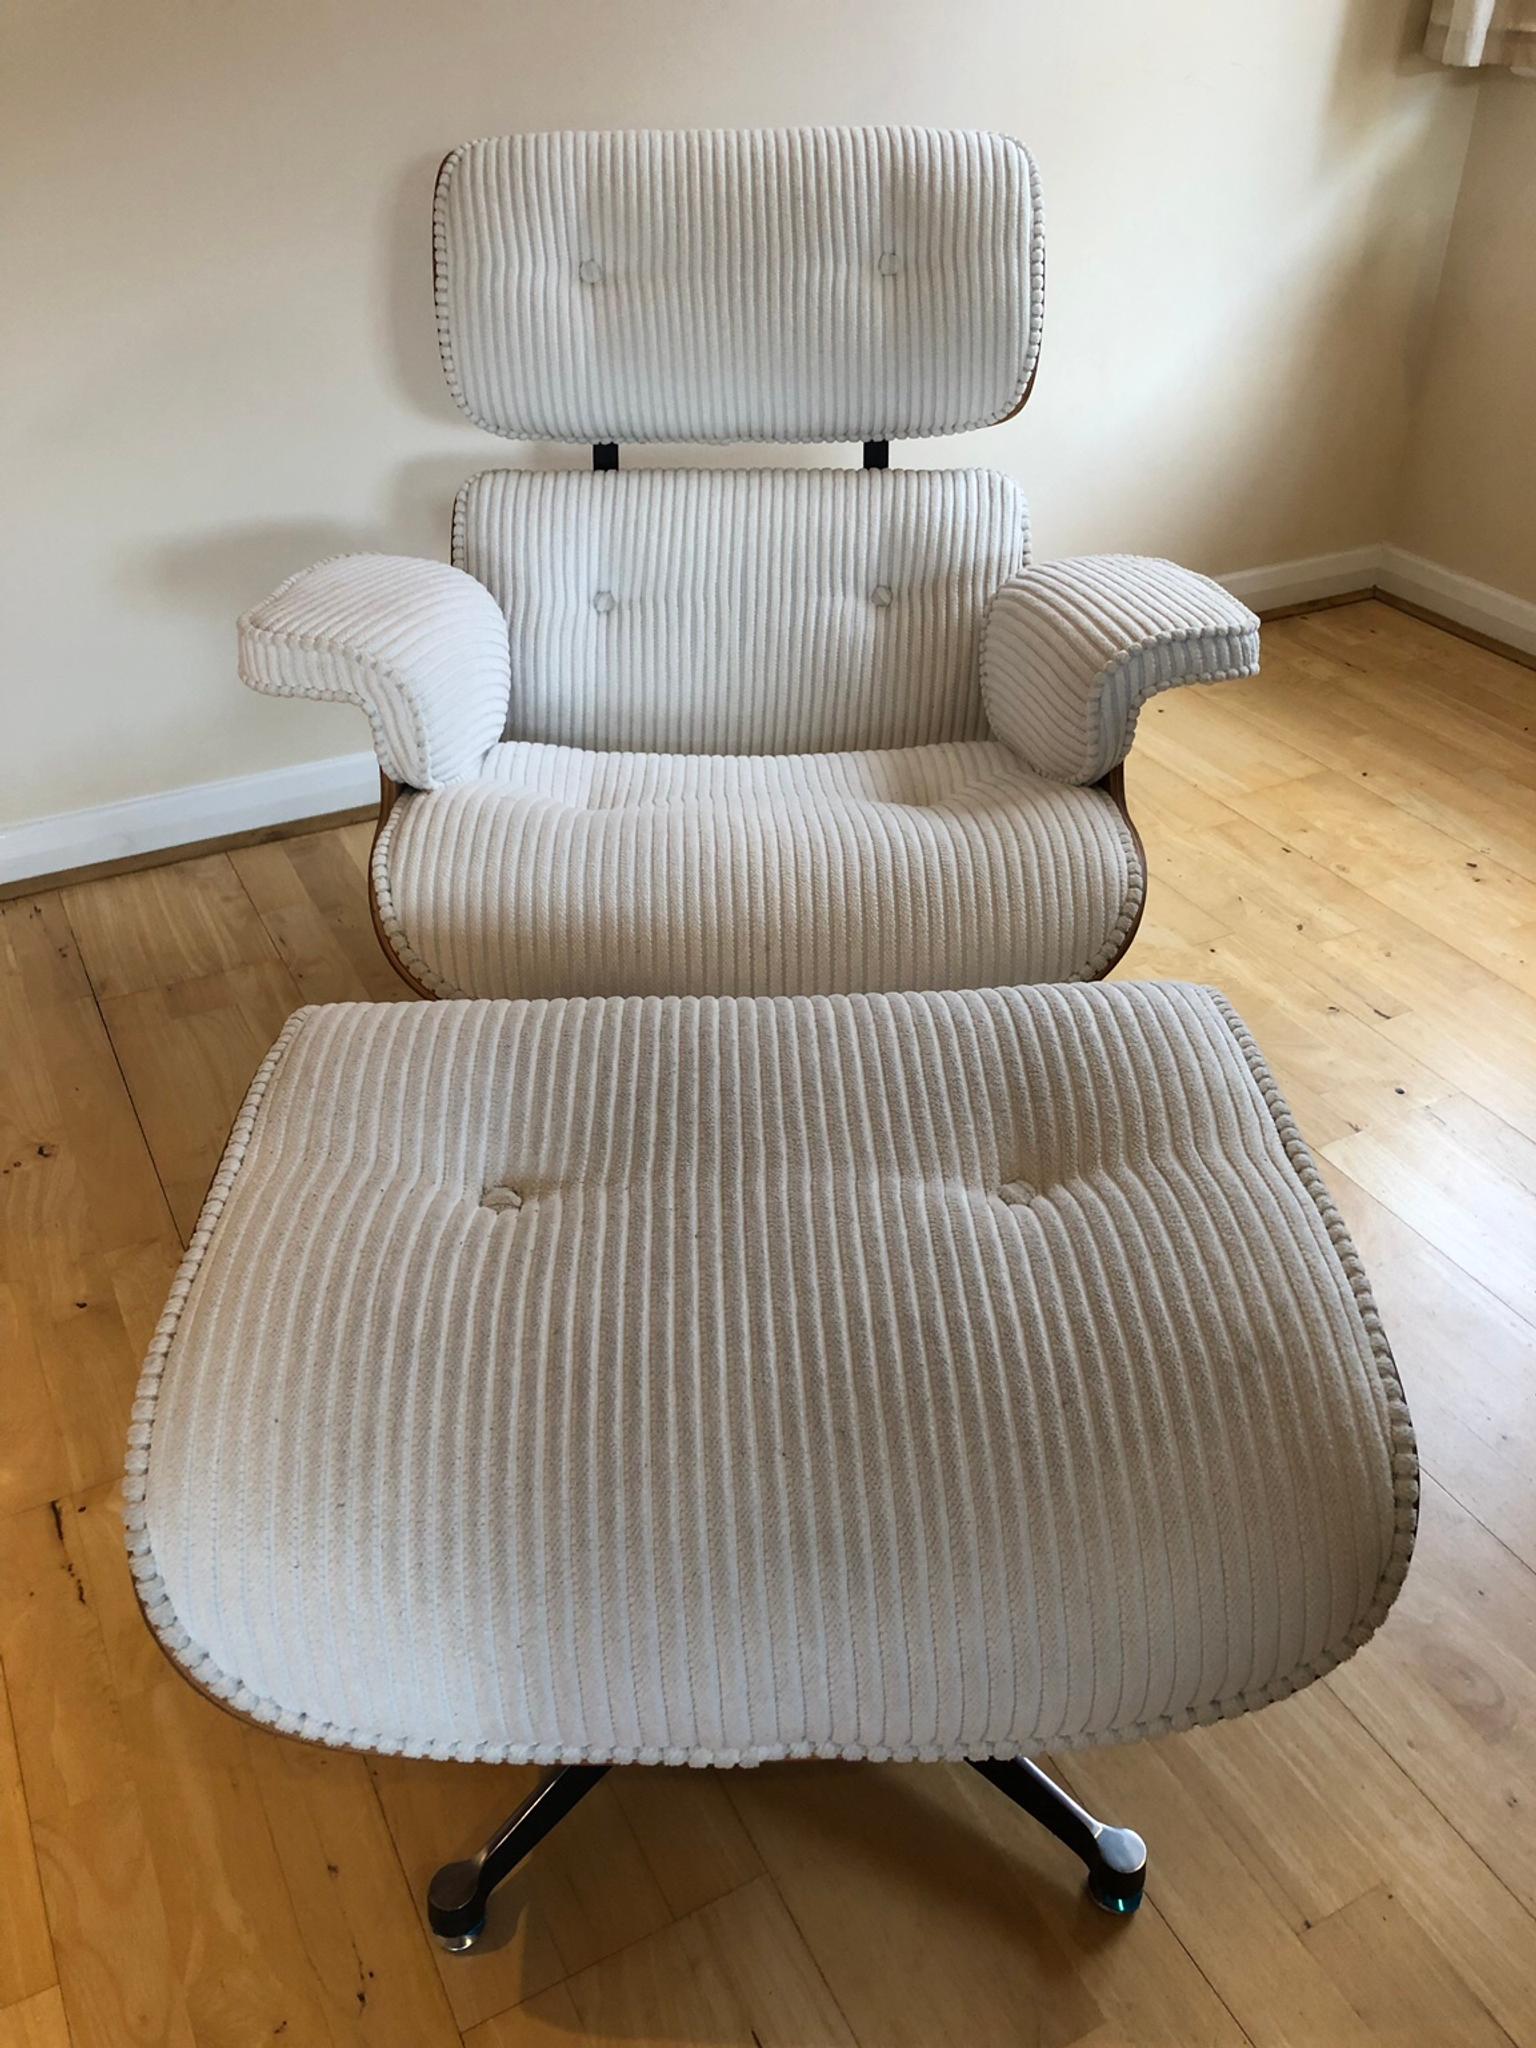 Charles Eames replica lounge chair in B31 Birmingham for £